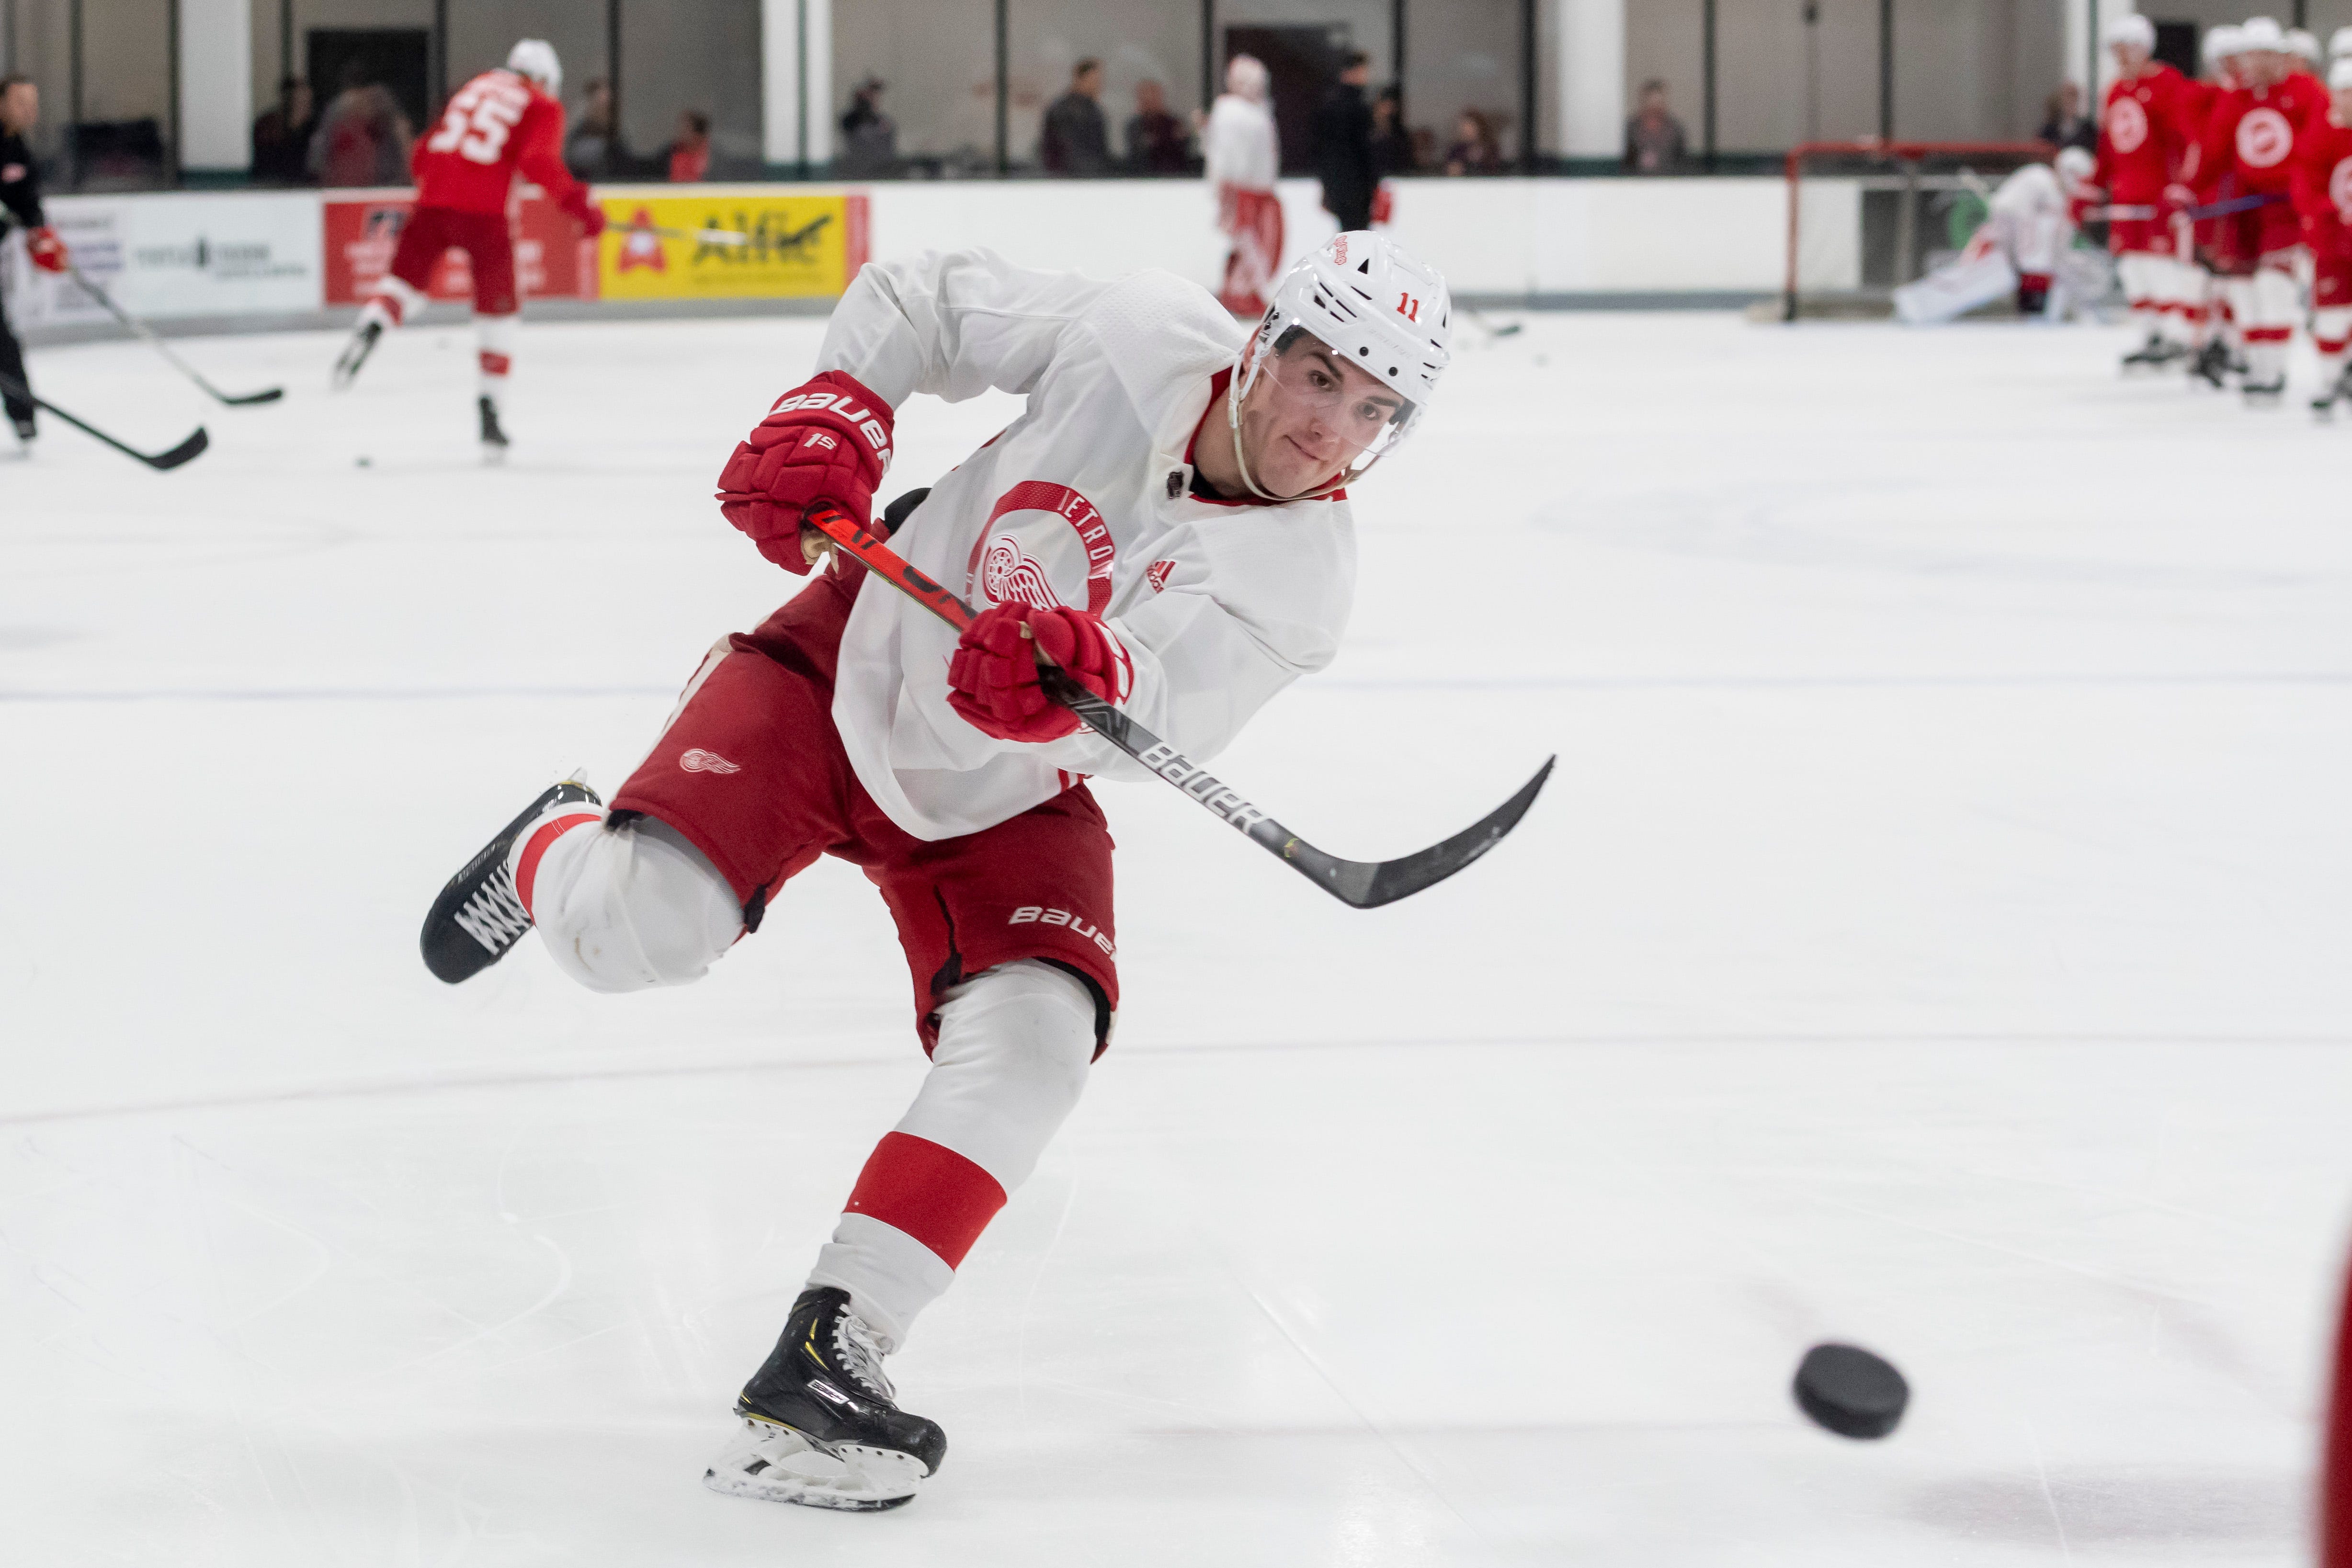 Detroit right wing Filip Zadina takes a shot during practice.